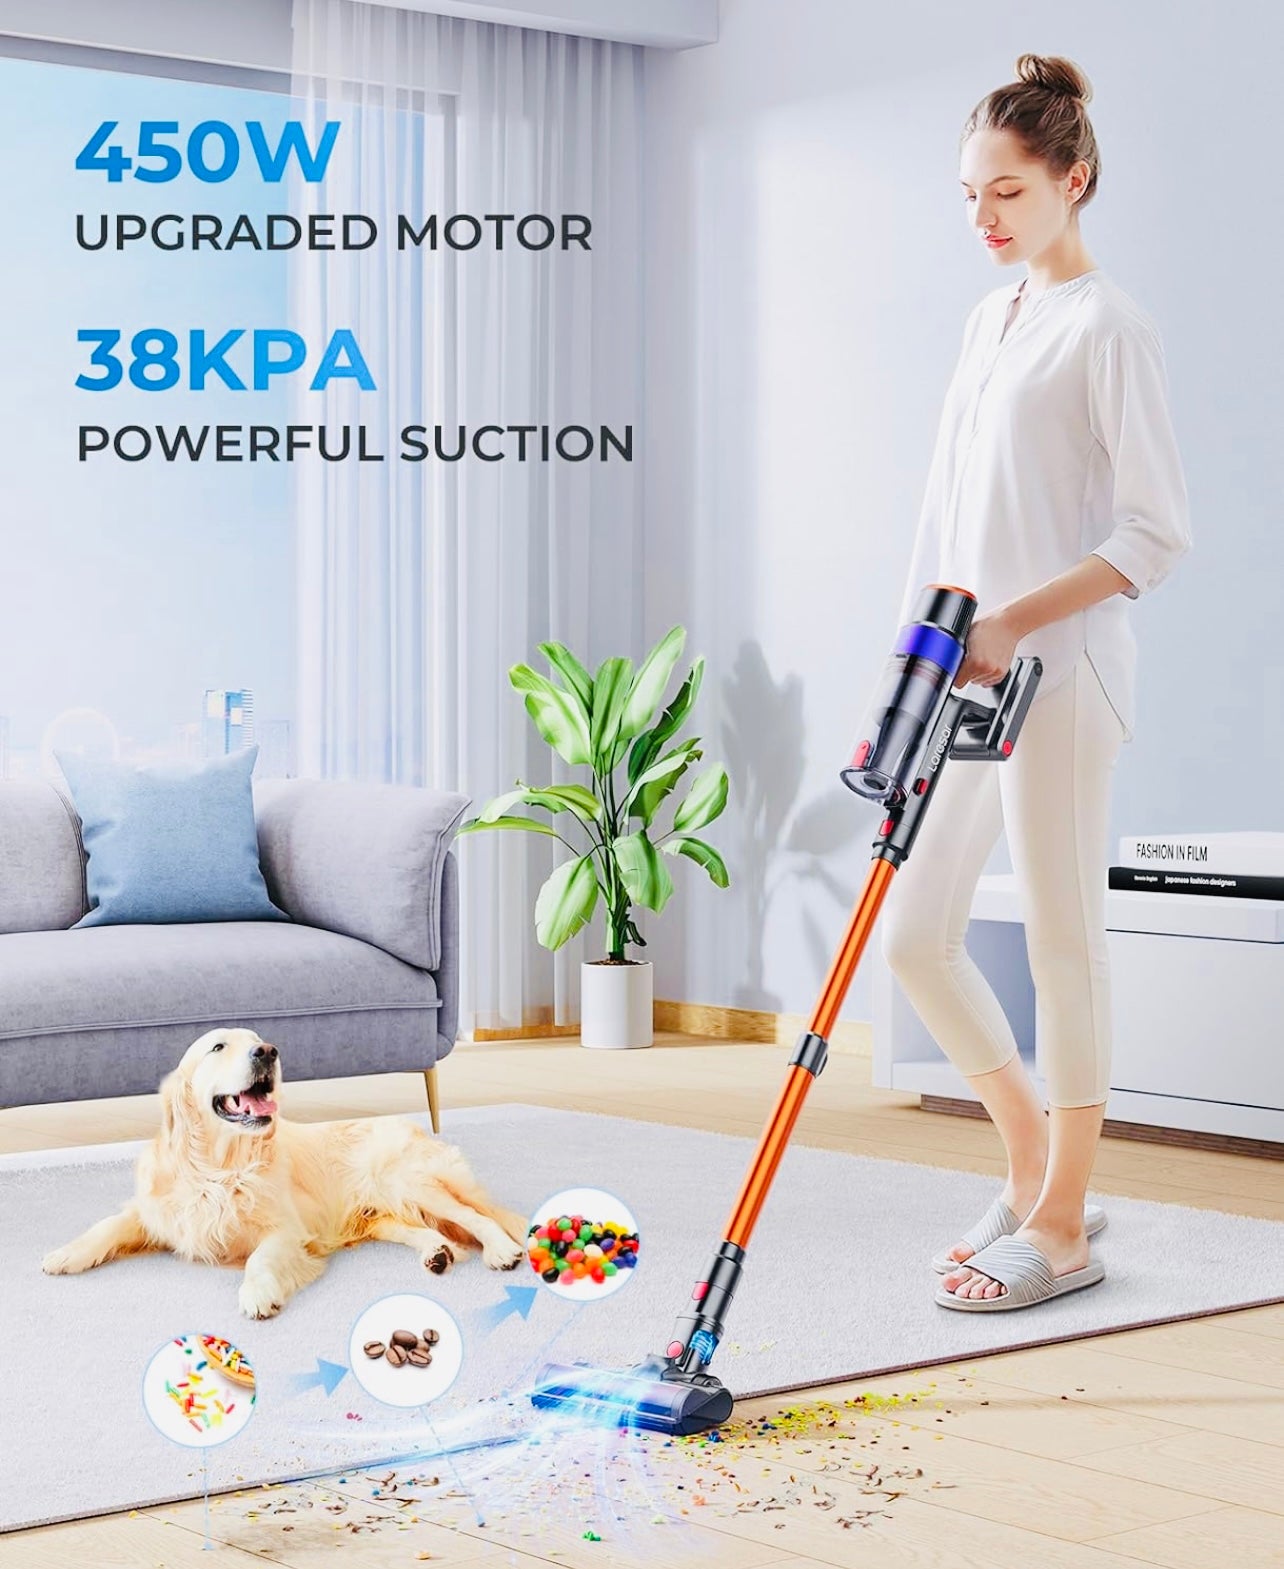 Laresar Cordless Vacuum Cleaners 450W/38KPa Stick Vacuum Cleaner with LCD Touch Screen Up to 55 Mins Runtime, Lightweight Handheld Vacuum for Hardwood Floor Carpet Pet Hair Car Stair